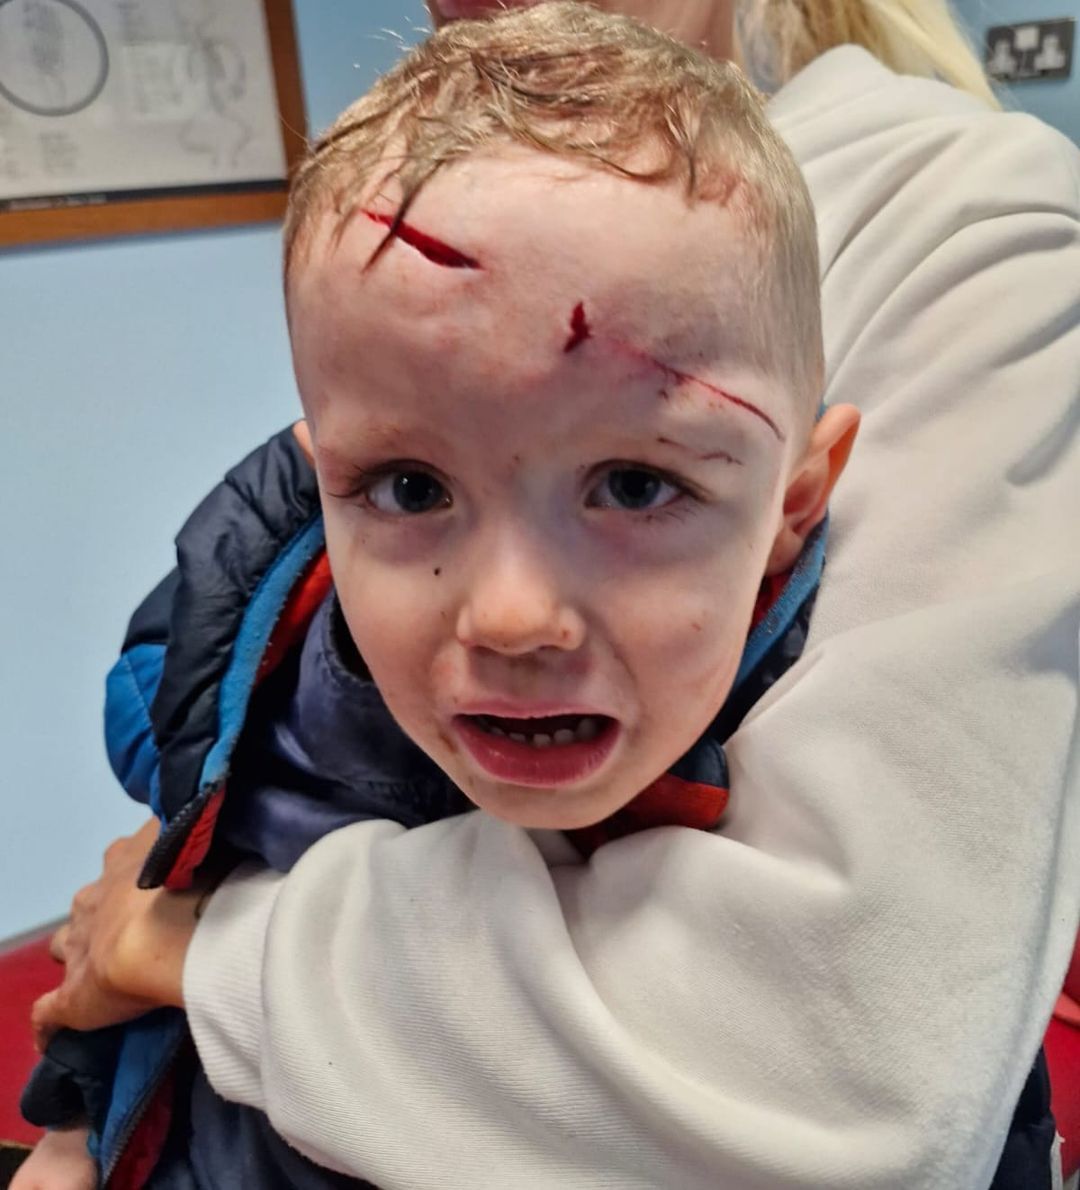 HORRIFIC ORDEAL: Keaghán (3) after he was attacked by a dog